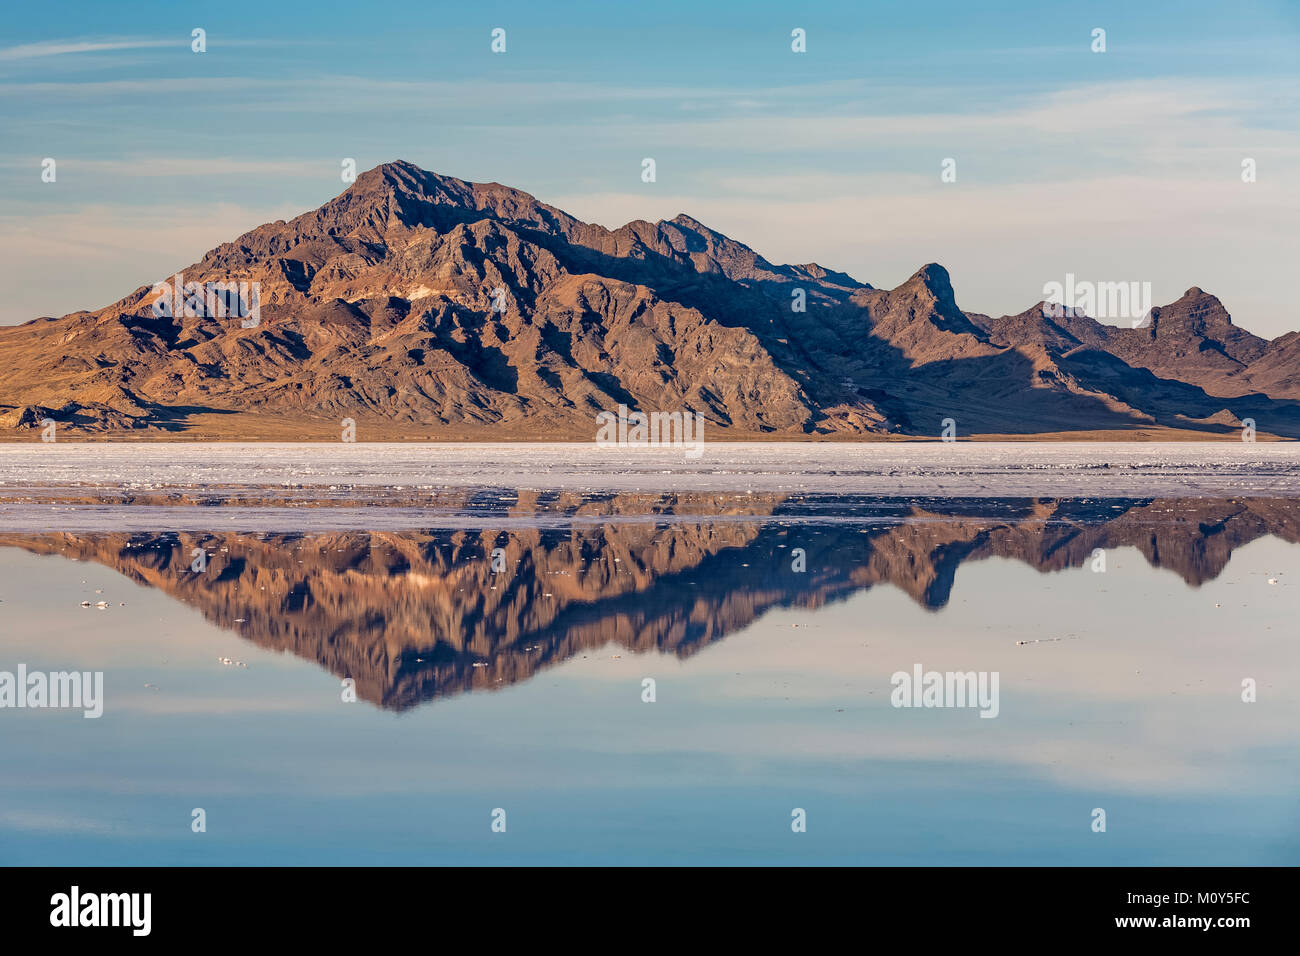 Silver Island Range reflecting in salty water at the Bonneville Salt Flats, which is BLM land west of the Great Salt Lake, Utah, USA Stock Photo